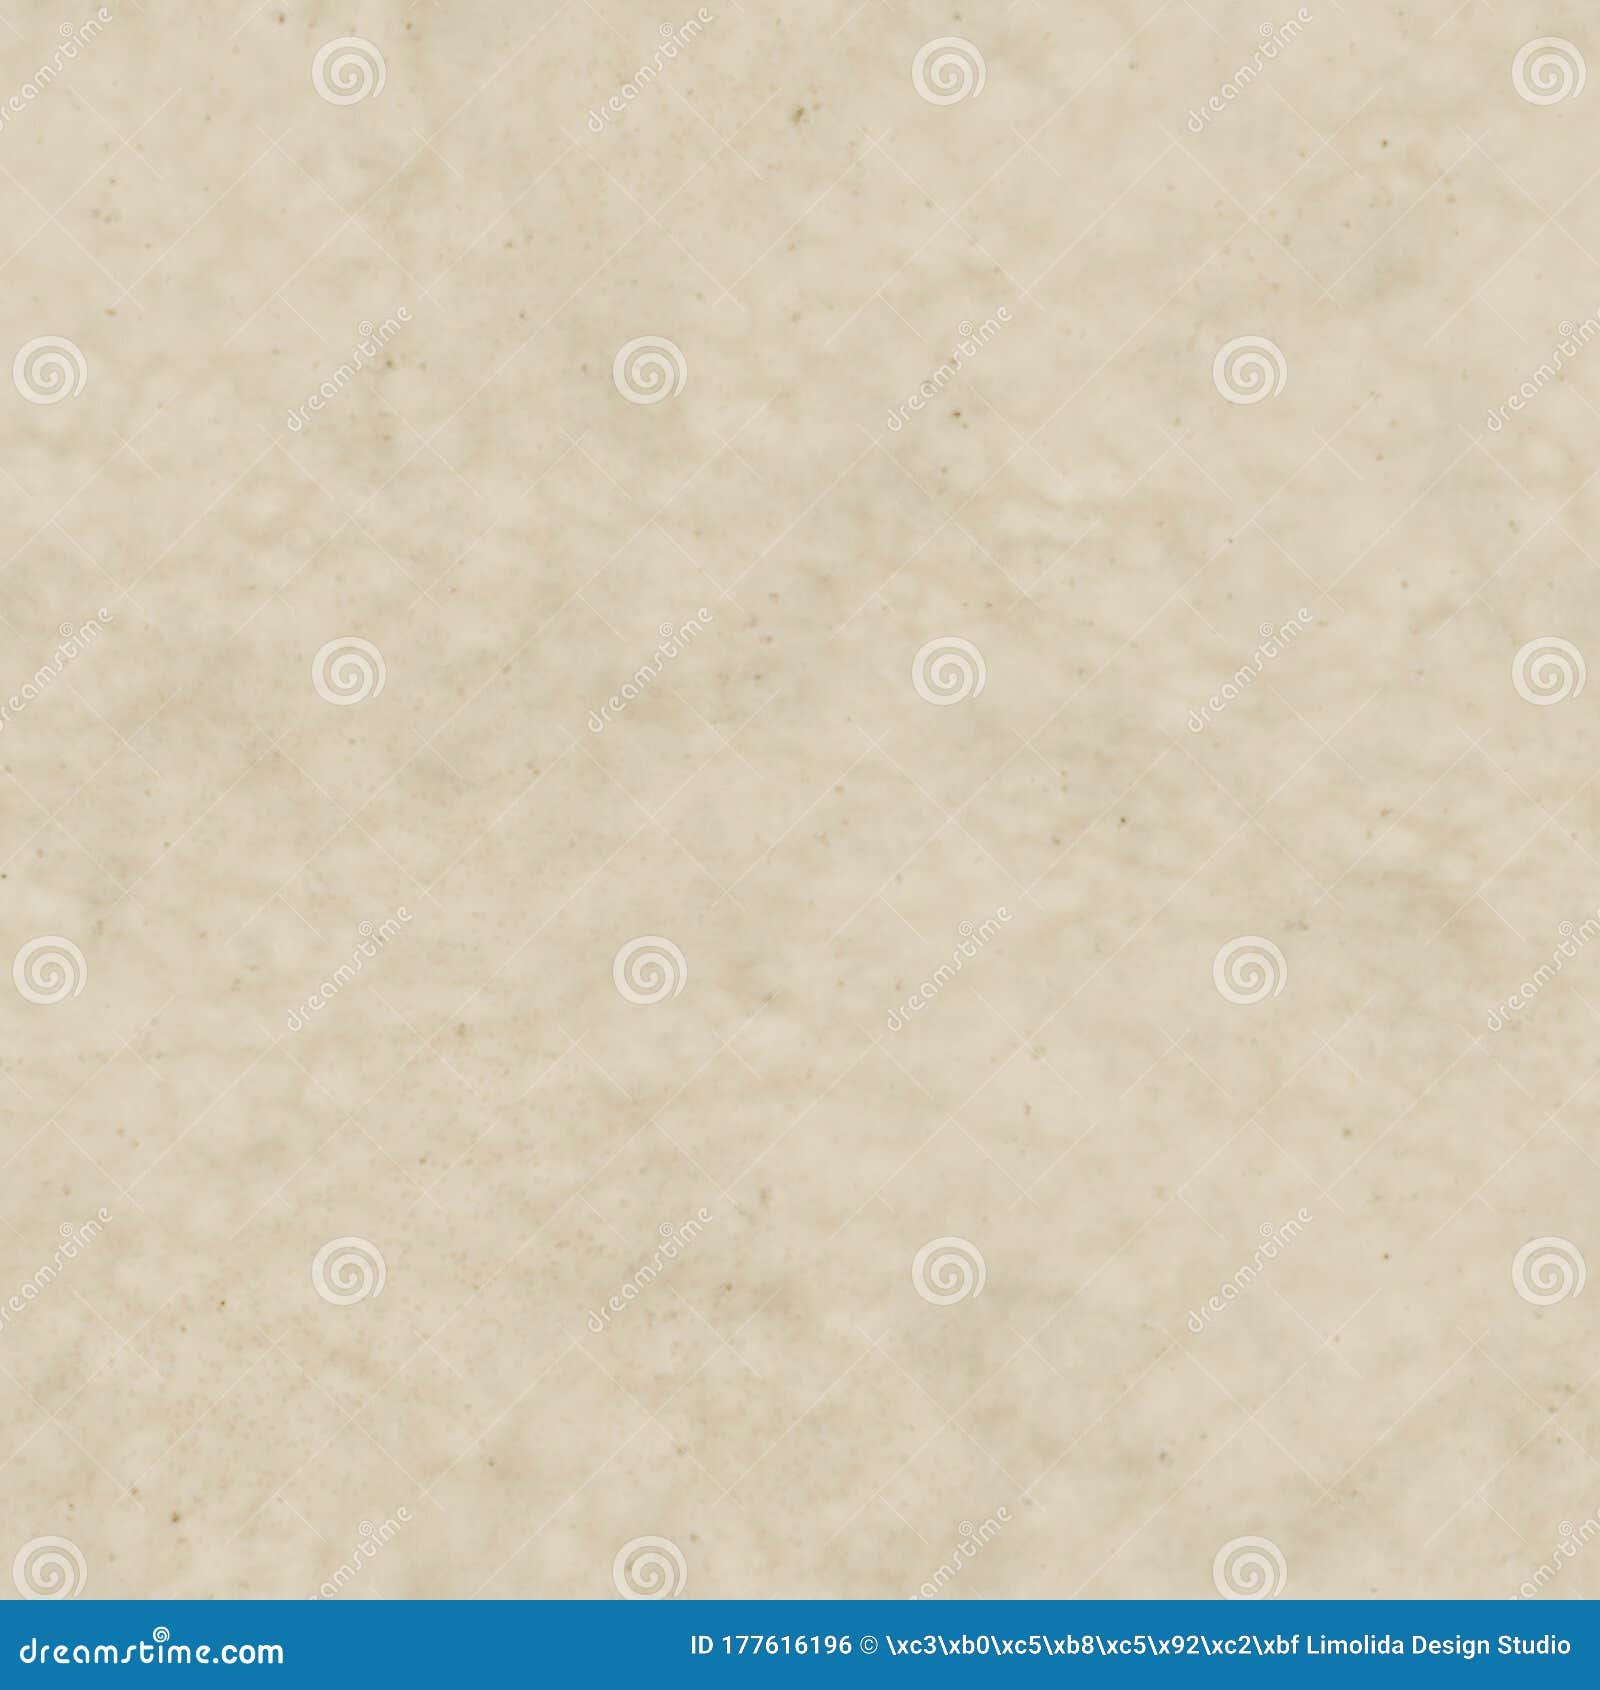 old parchment paper grunge texture. vintage beige brown mottled worn surface background. seamless sepia aged smooth